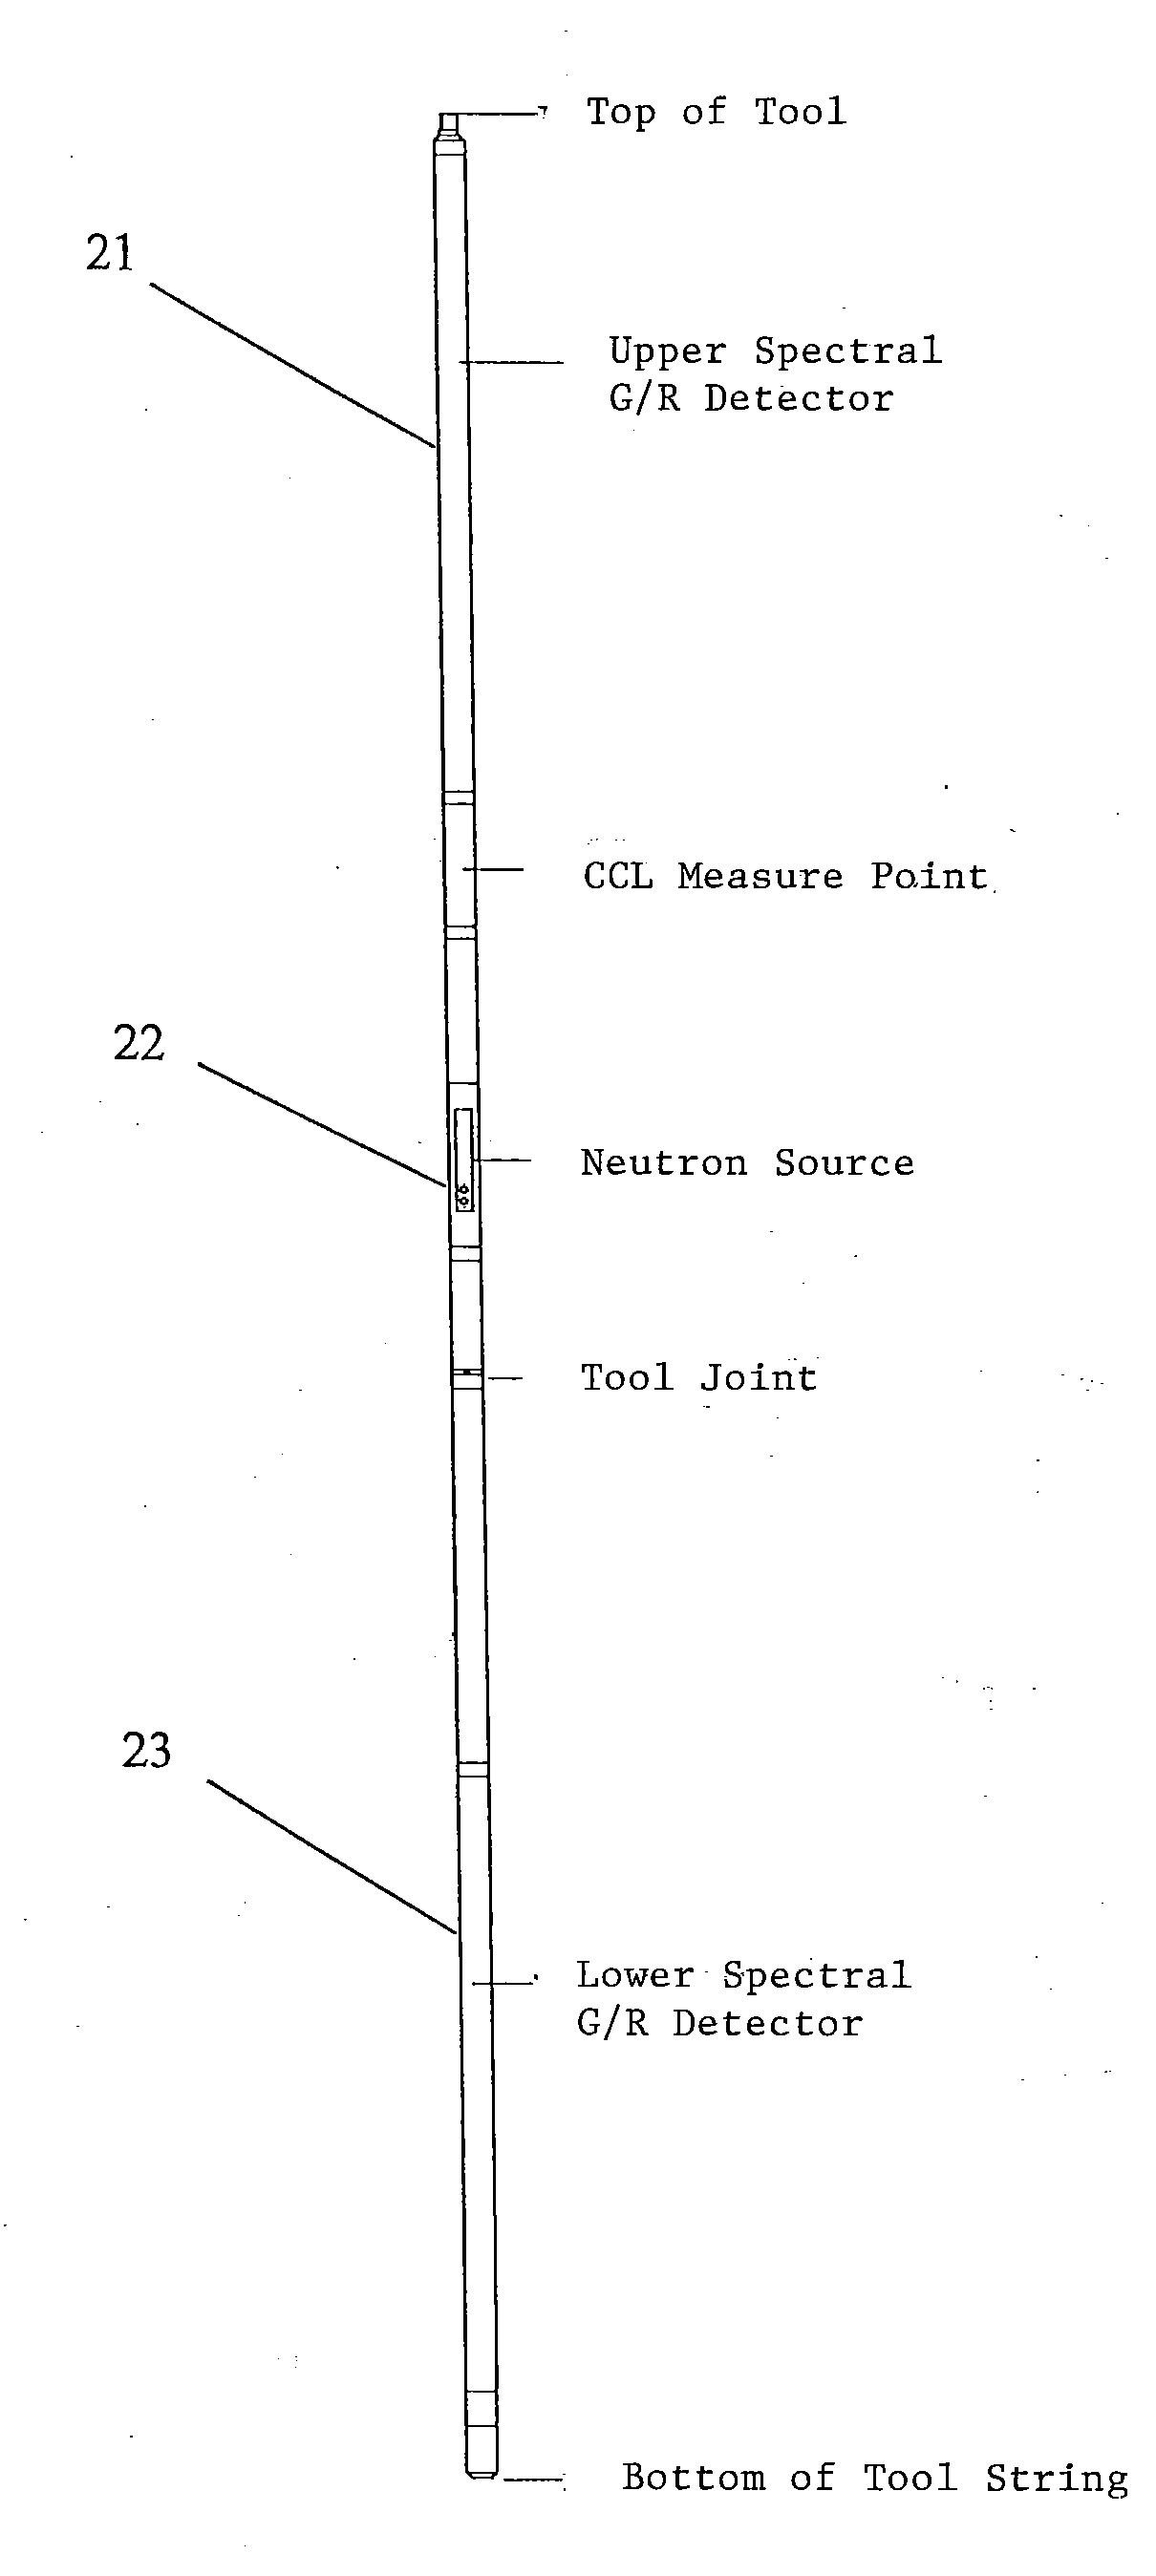 Method and tool for determination of fracture geometry in subterranean formations based on in-situ neutron activation analysis